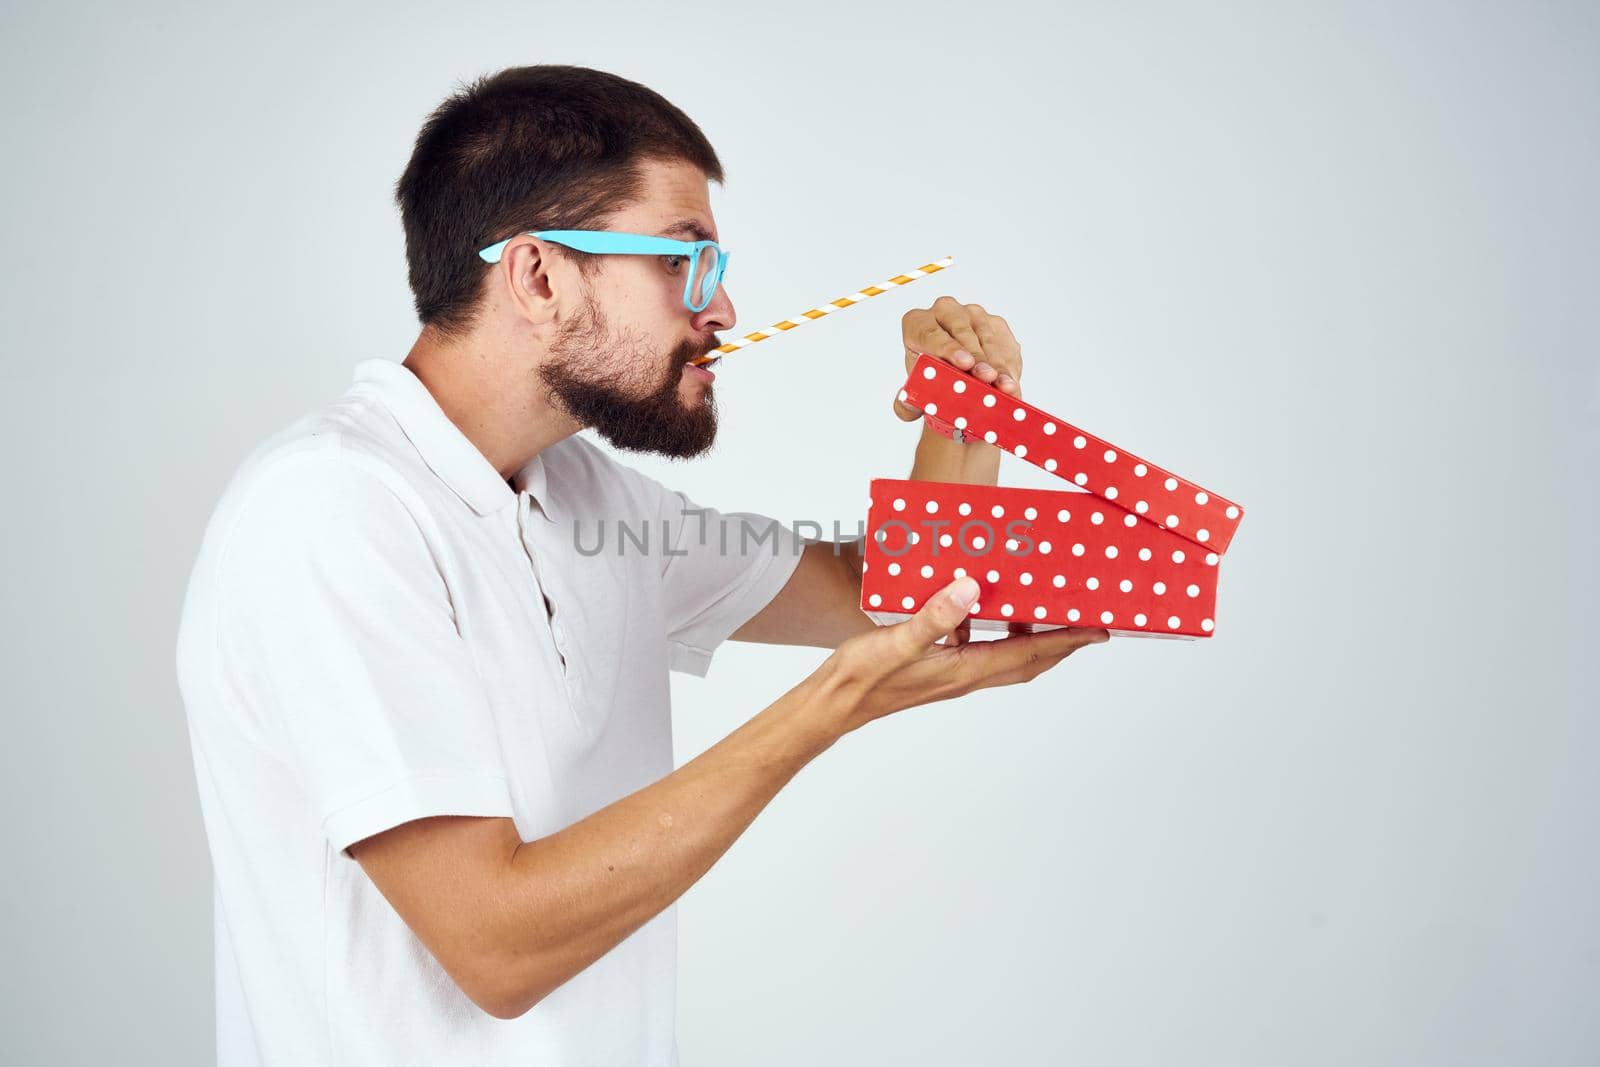 man wearing glasses gift box holiday fun light background. High quality photo